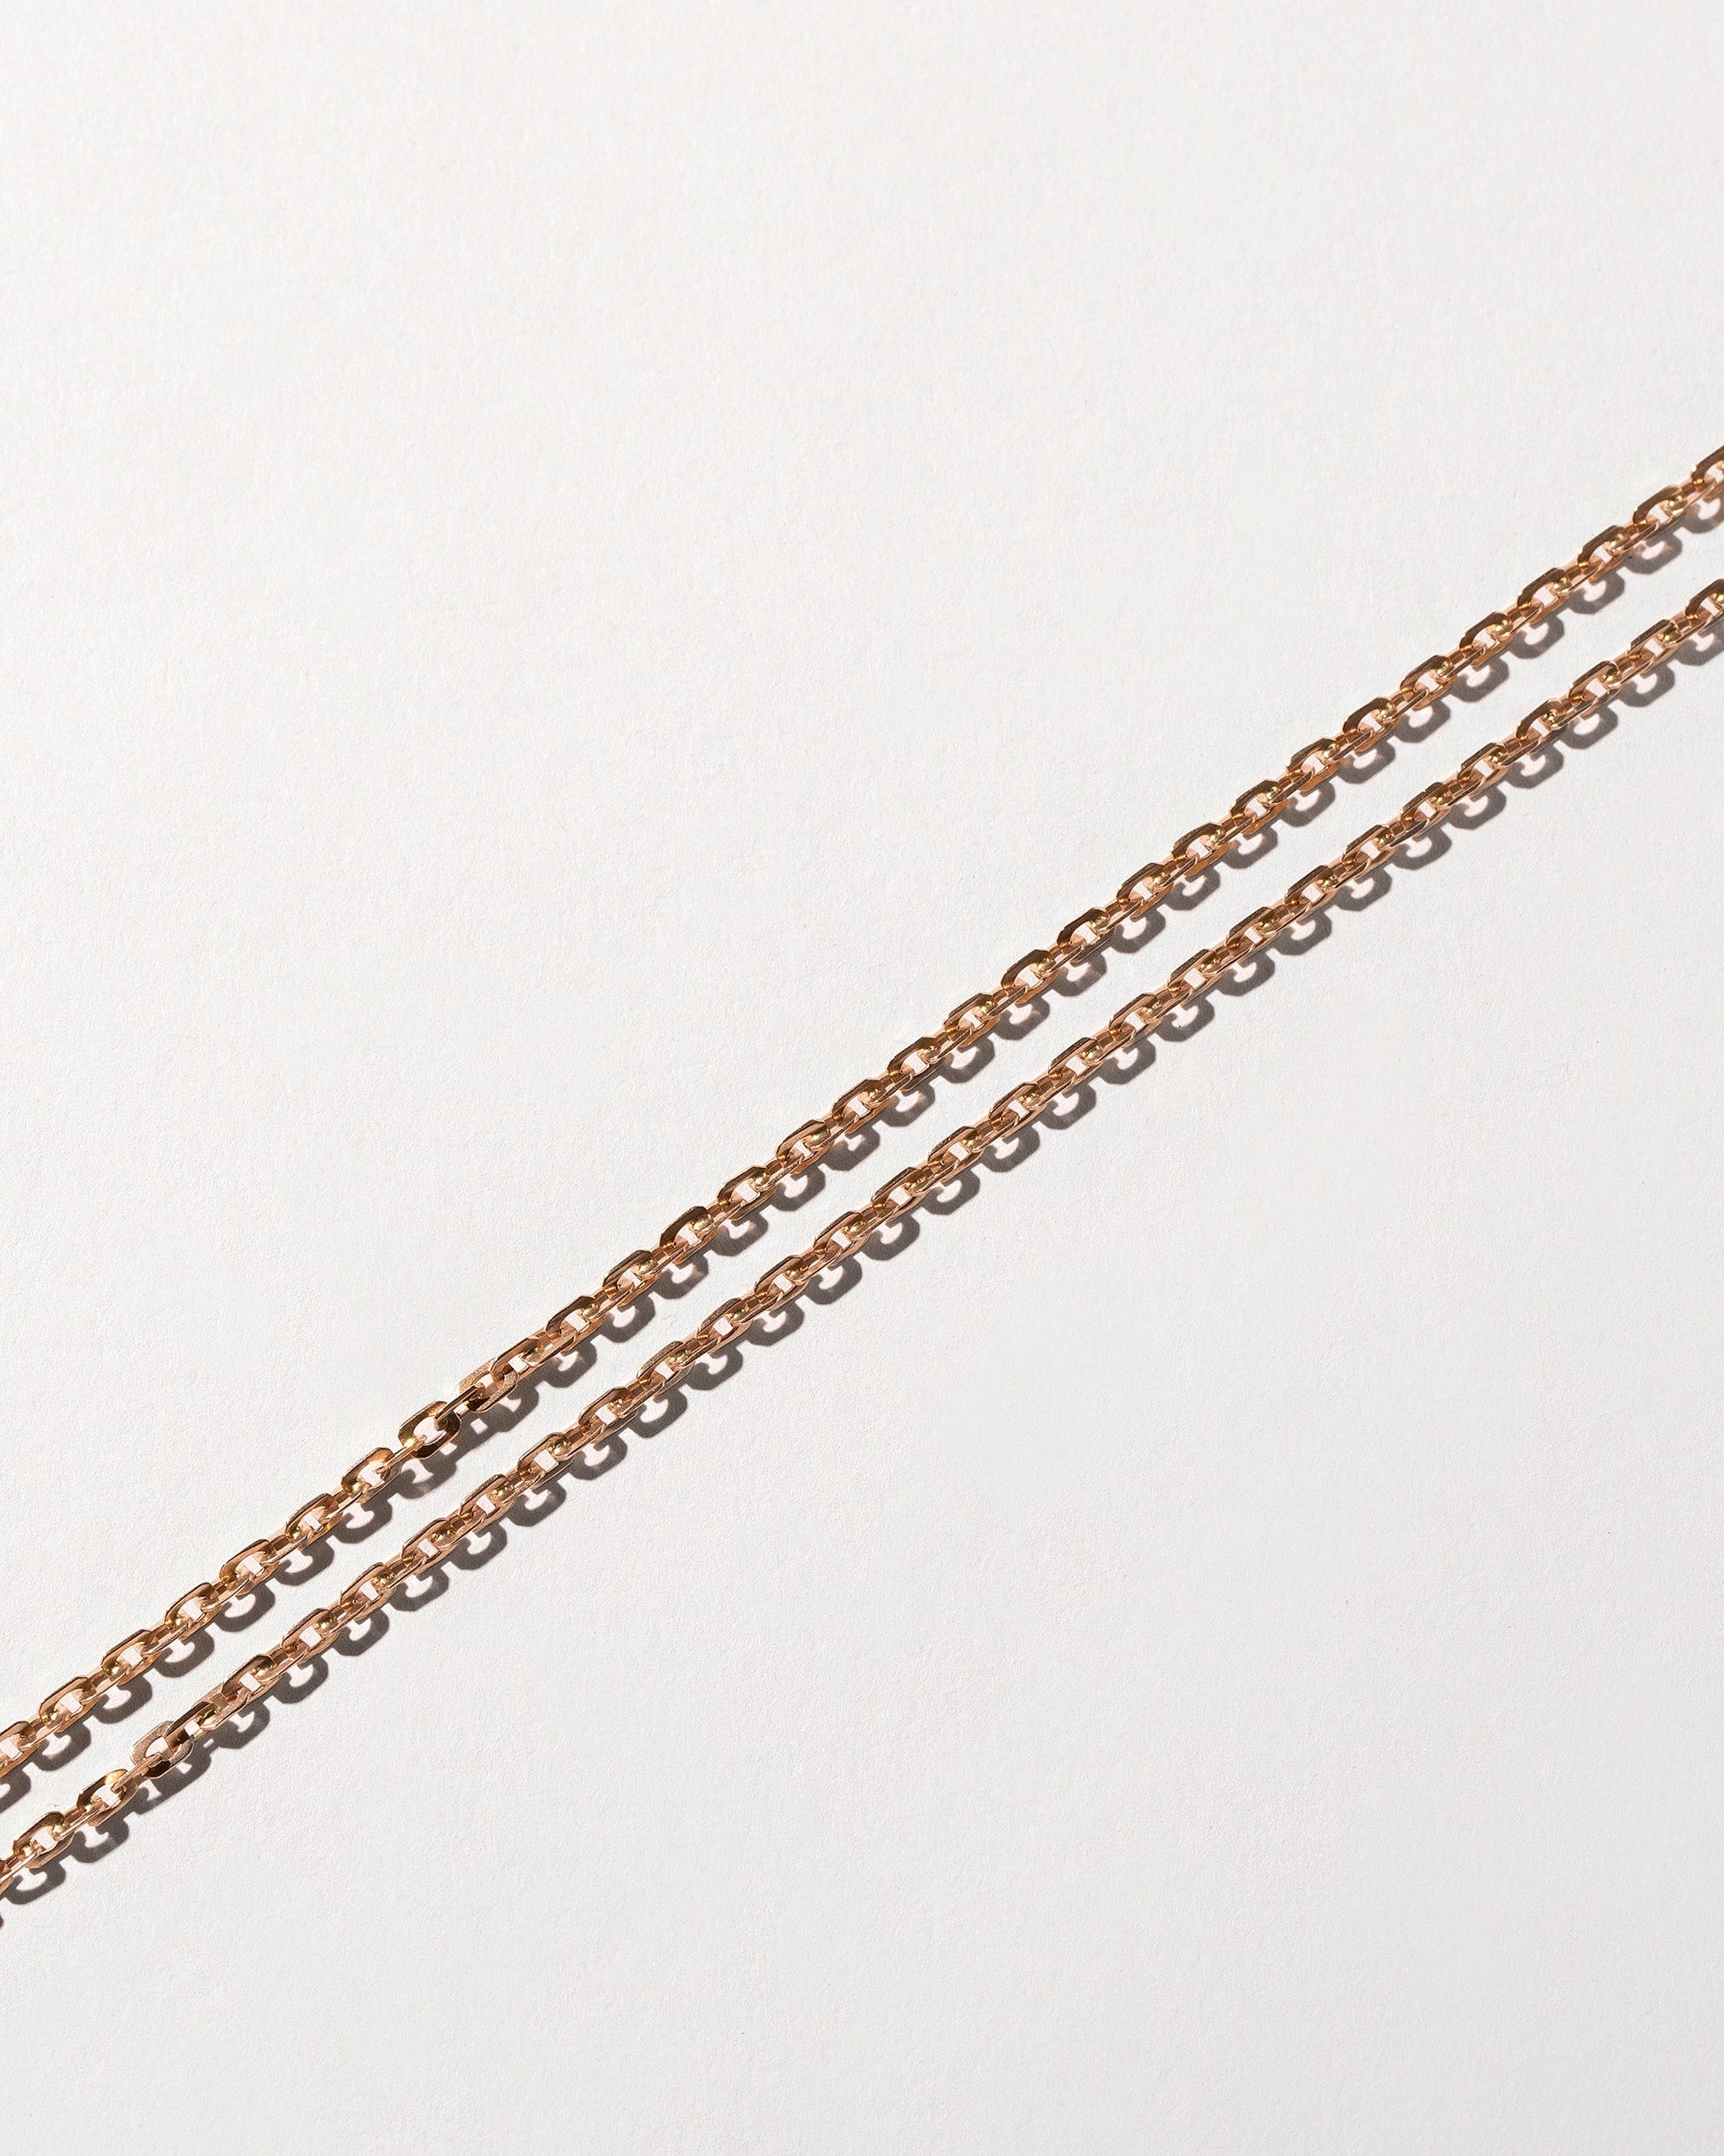  Oval Box Chain Necklace on light color background.